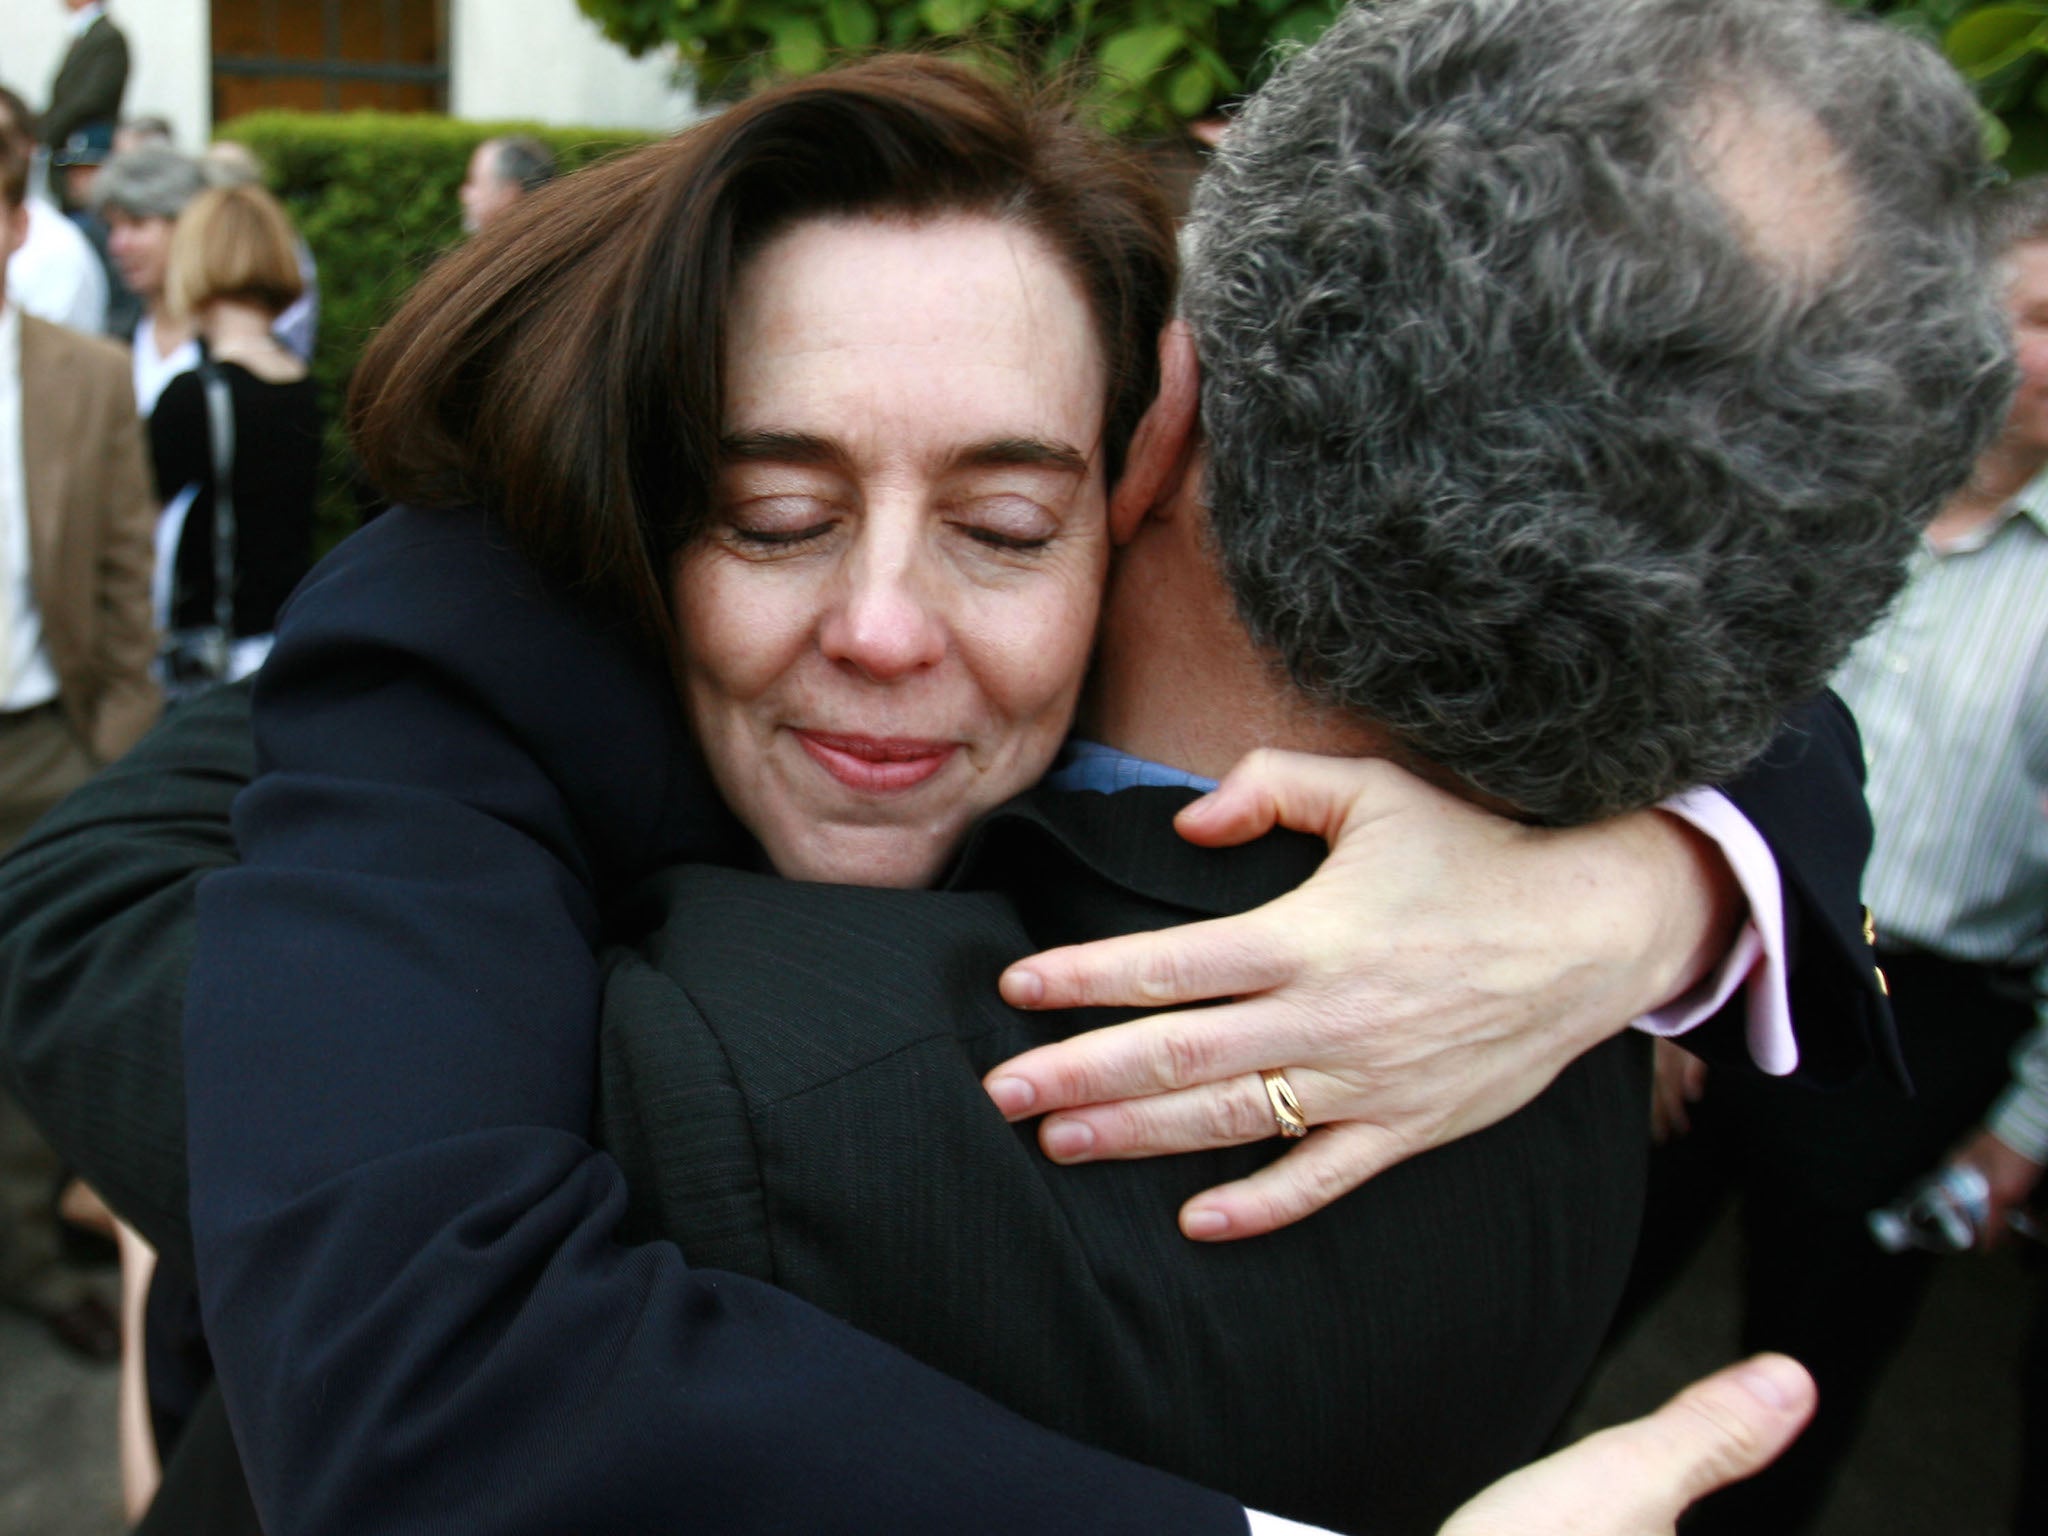 Kate Brown was sworn in as Oregon's Governor, the first openly bisexual governor in the US